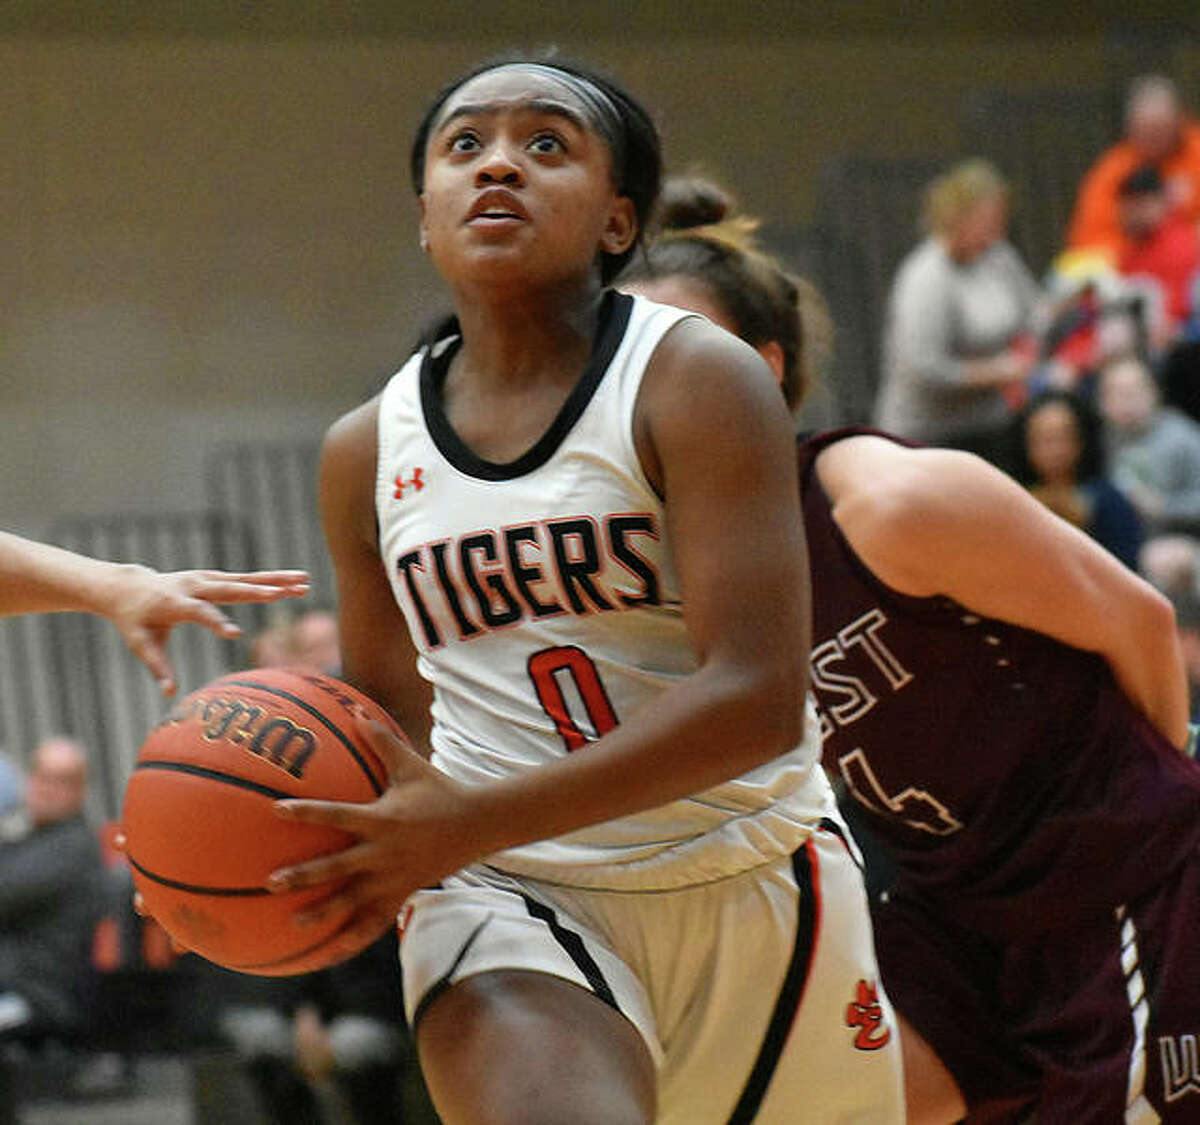 EHS senior guard Quierra Love drives to the basket in the second quarter against Belleville West on Thursday in Edwardsville.